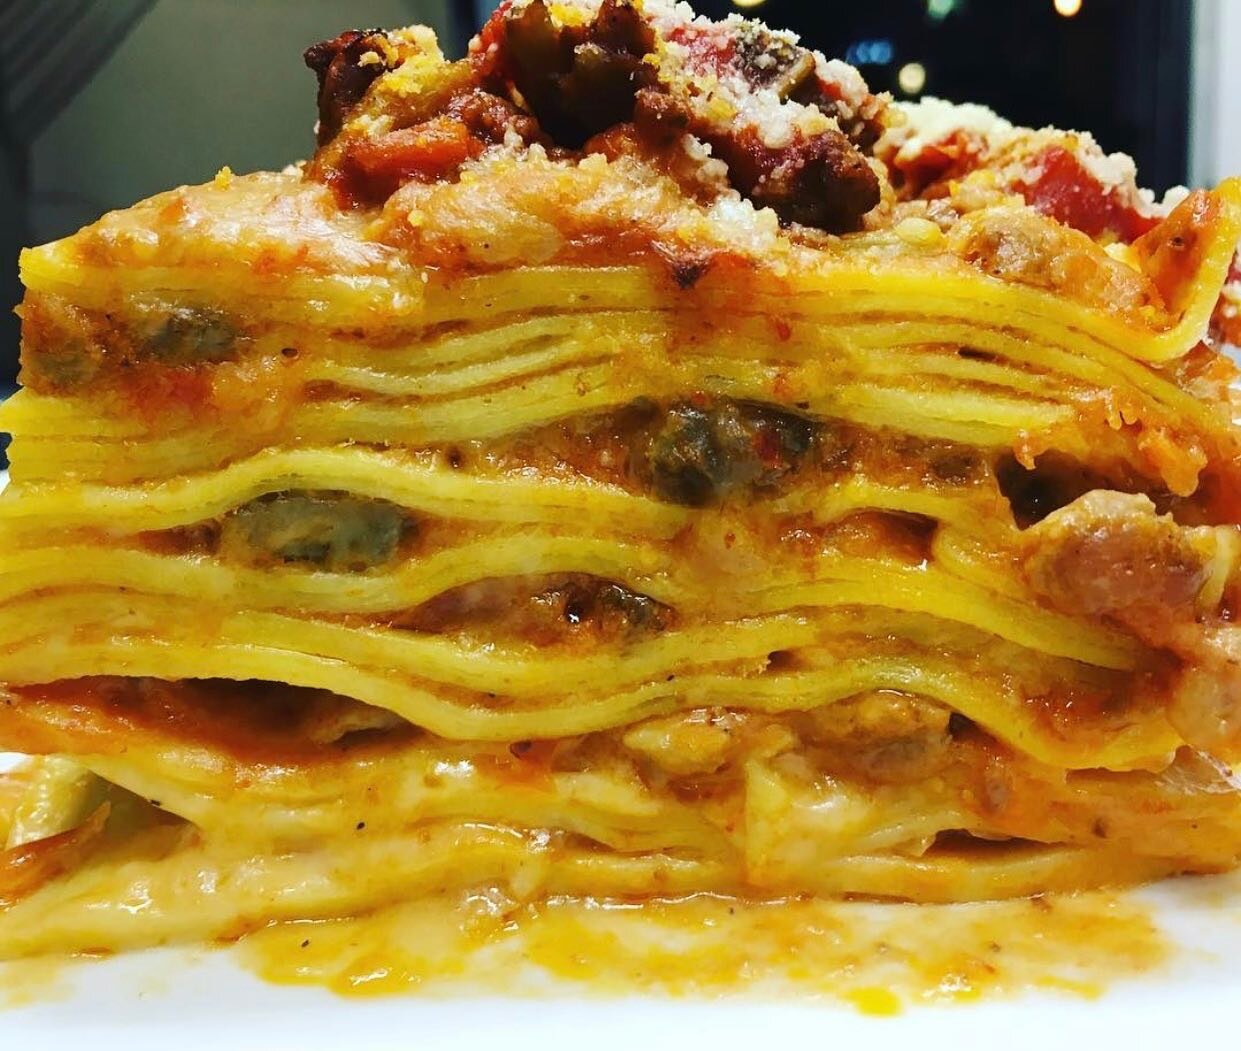 Did you miss this beauty?🍝 ⠀ ⠀

We are open for delivery! ⠀ ⠀ ⠀ ⠀

#lasagna #quarantinfood #comfortfood#trattoriadelivery